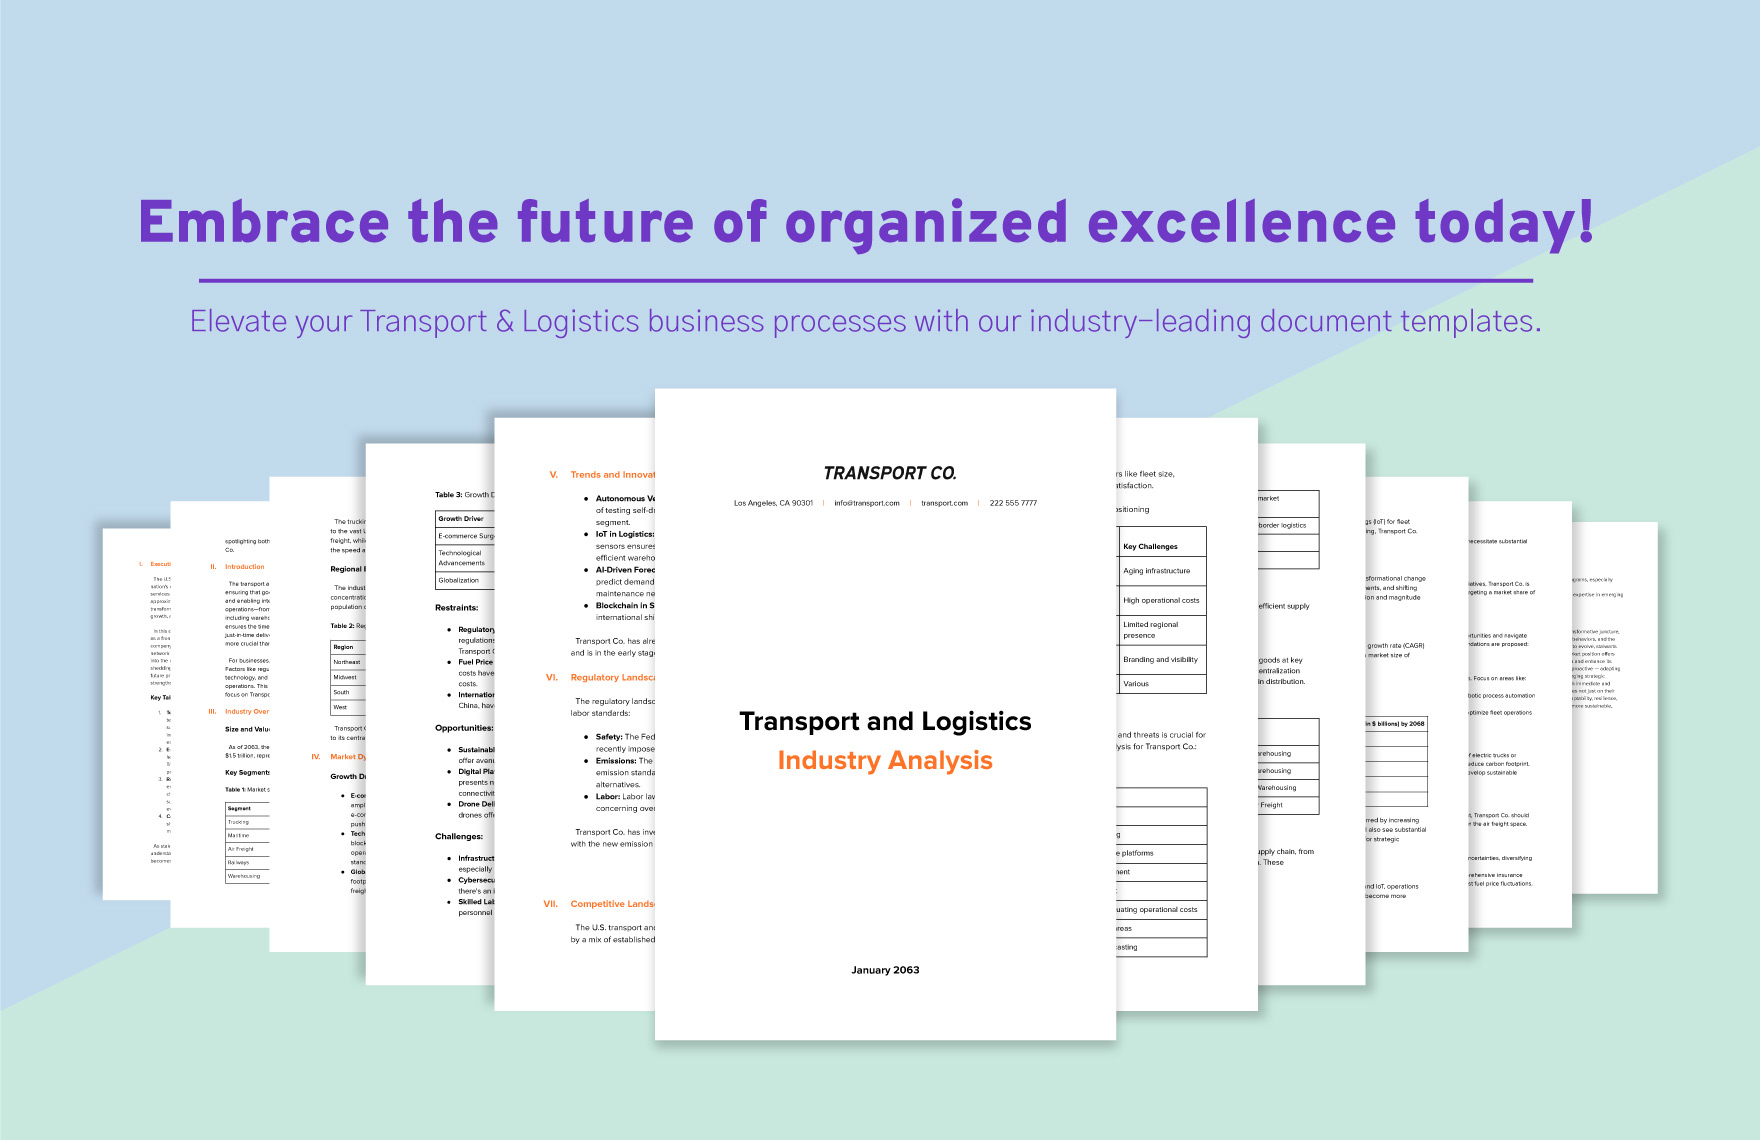 Transport and Logistics Industry Analysis Template